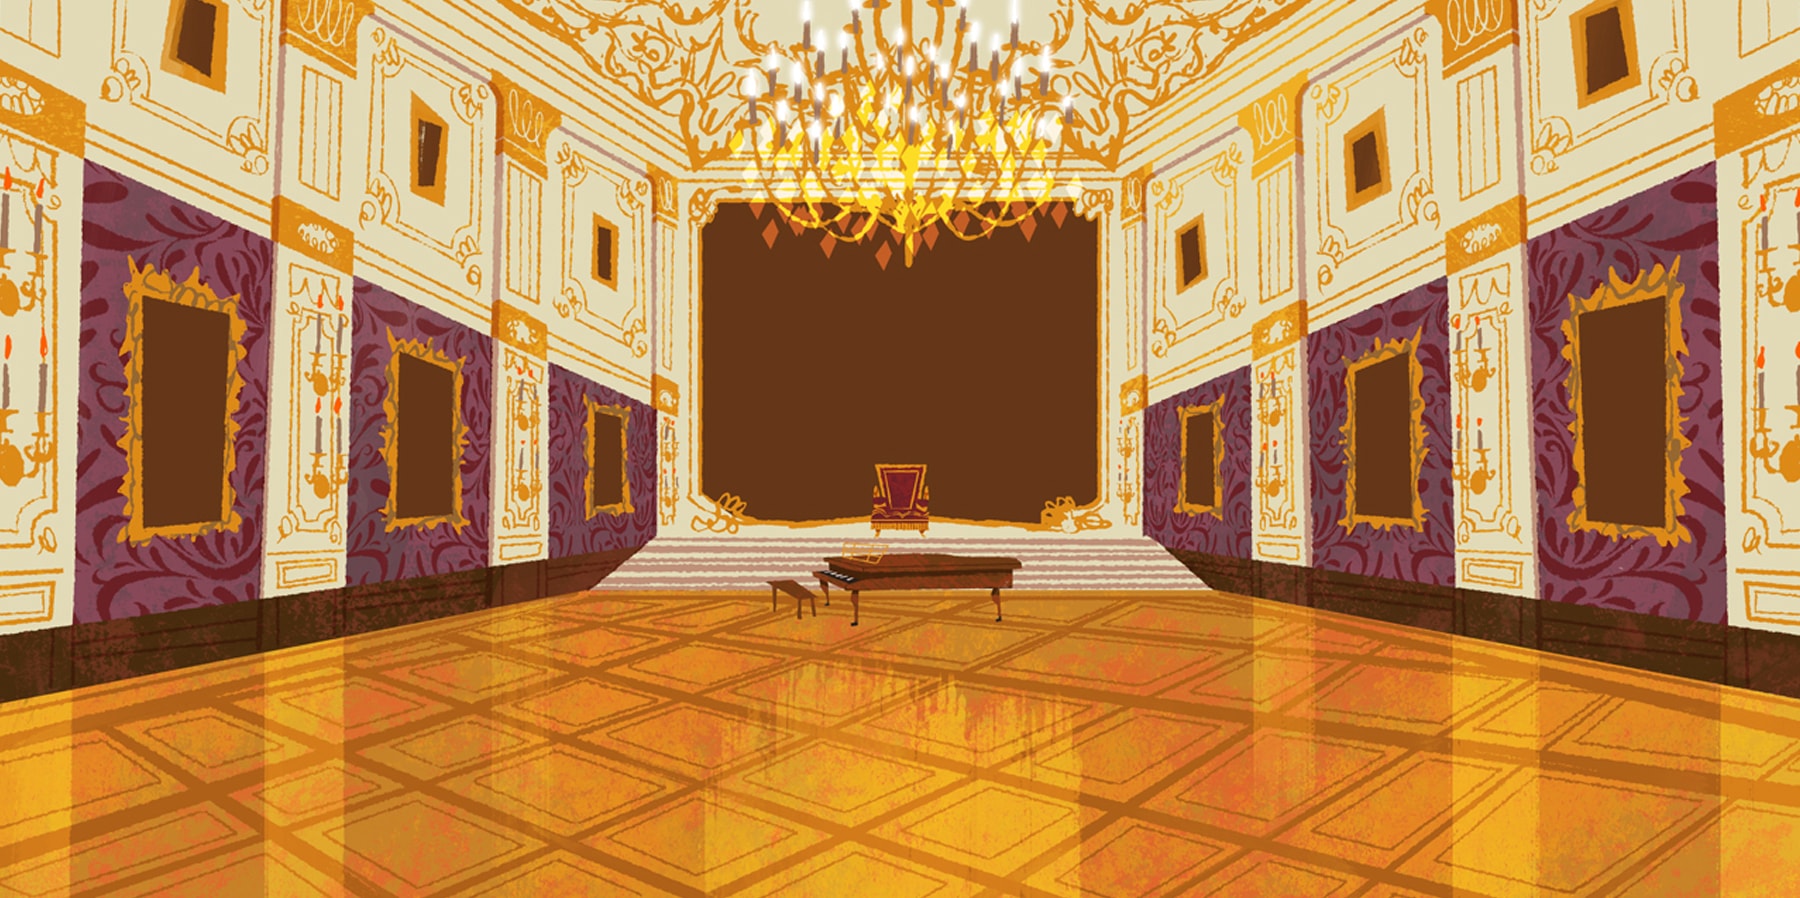 Chris Turnham's illustration of a grand concert hall, featuring polished floors, a grand piano and a large chandelier